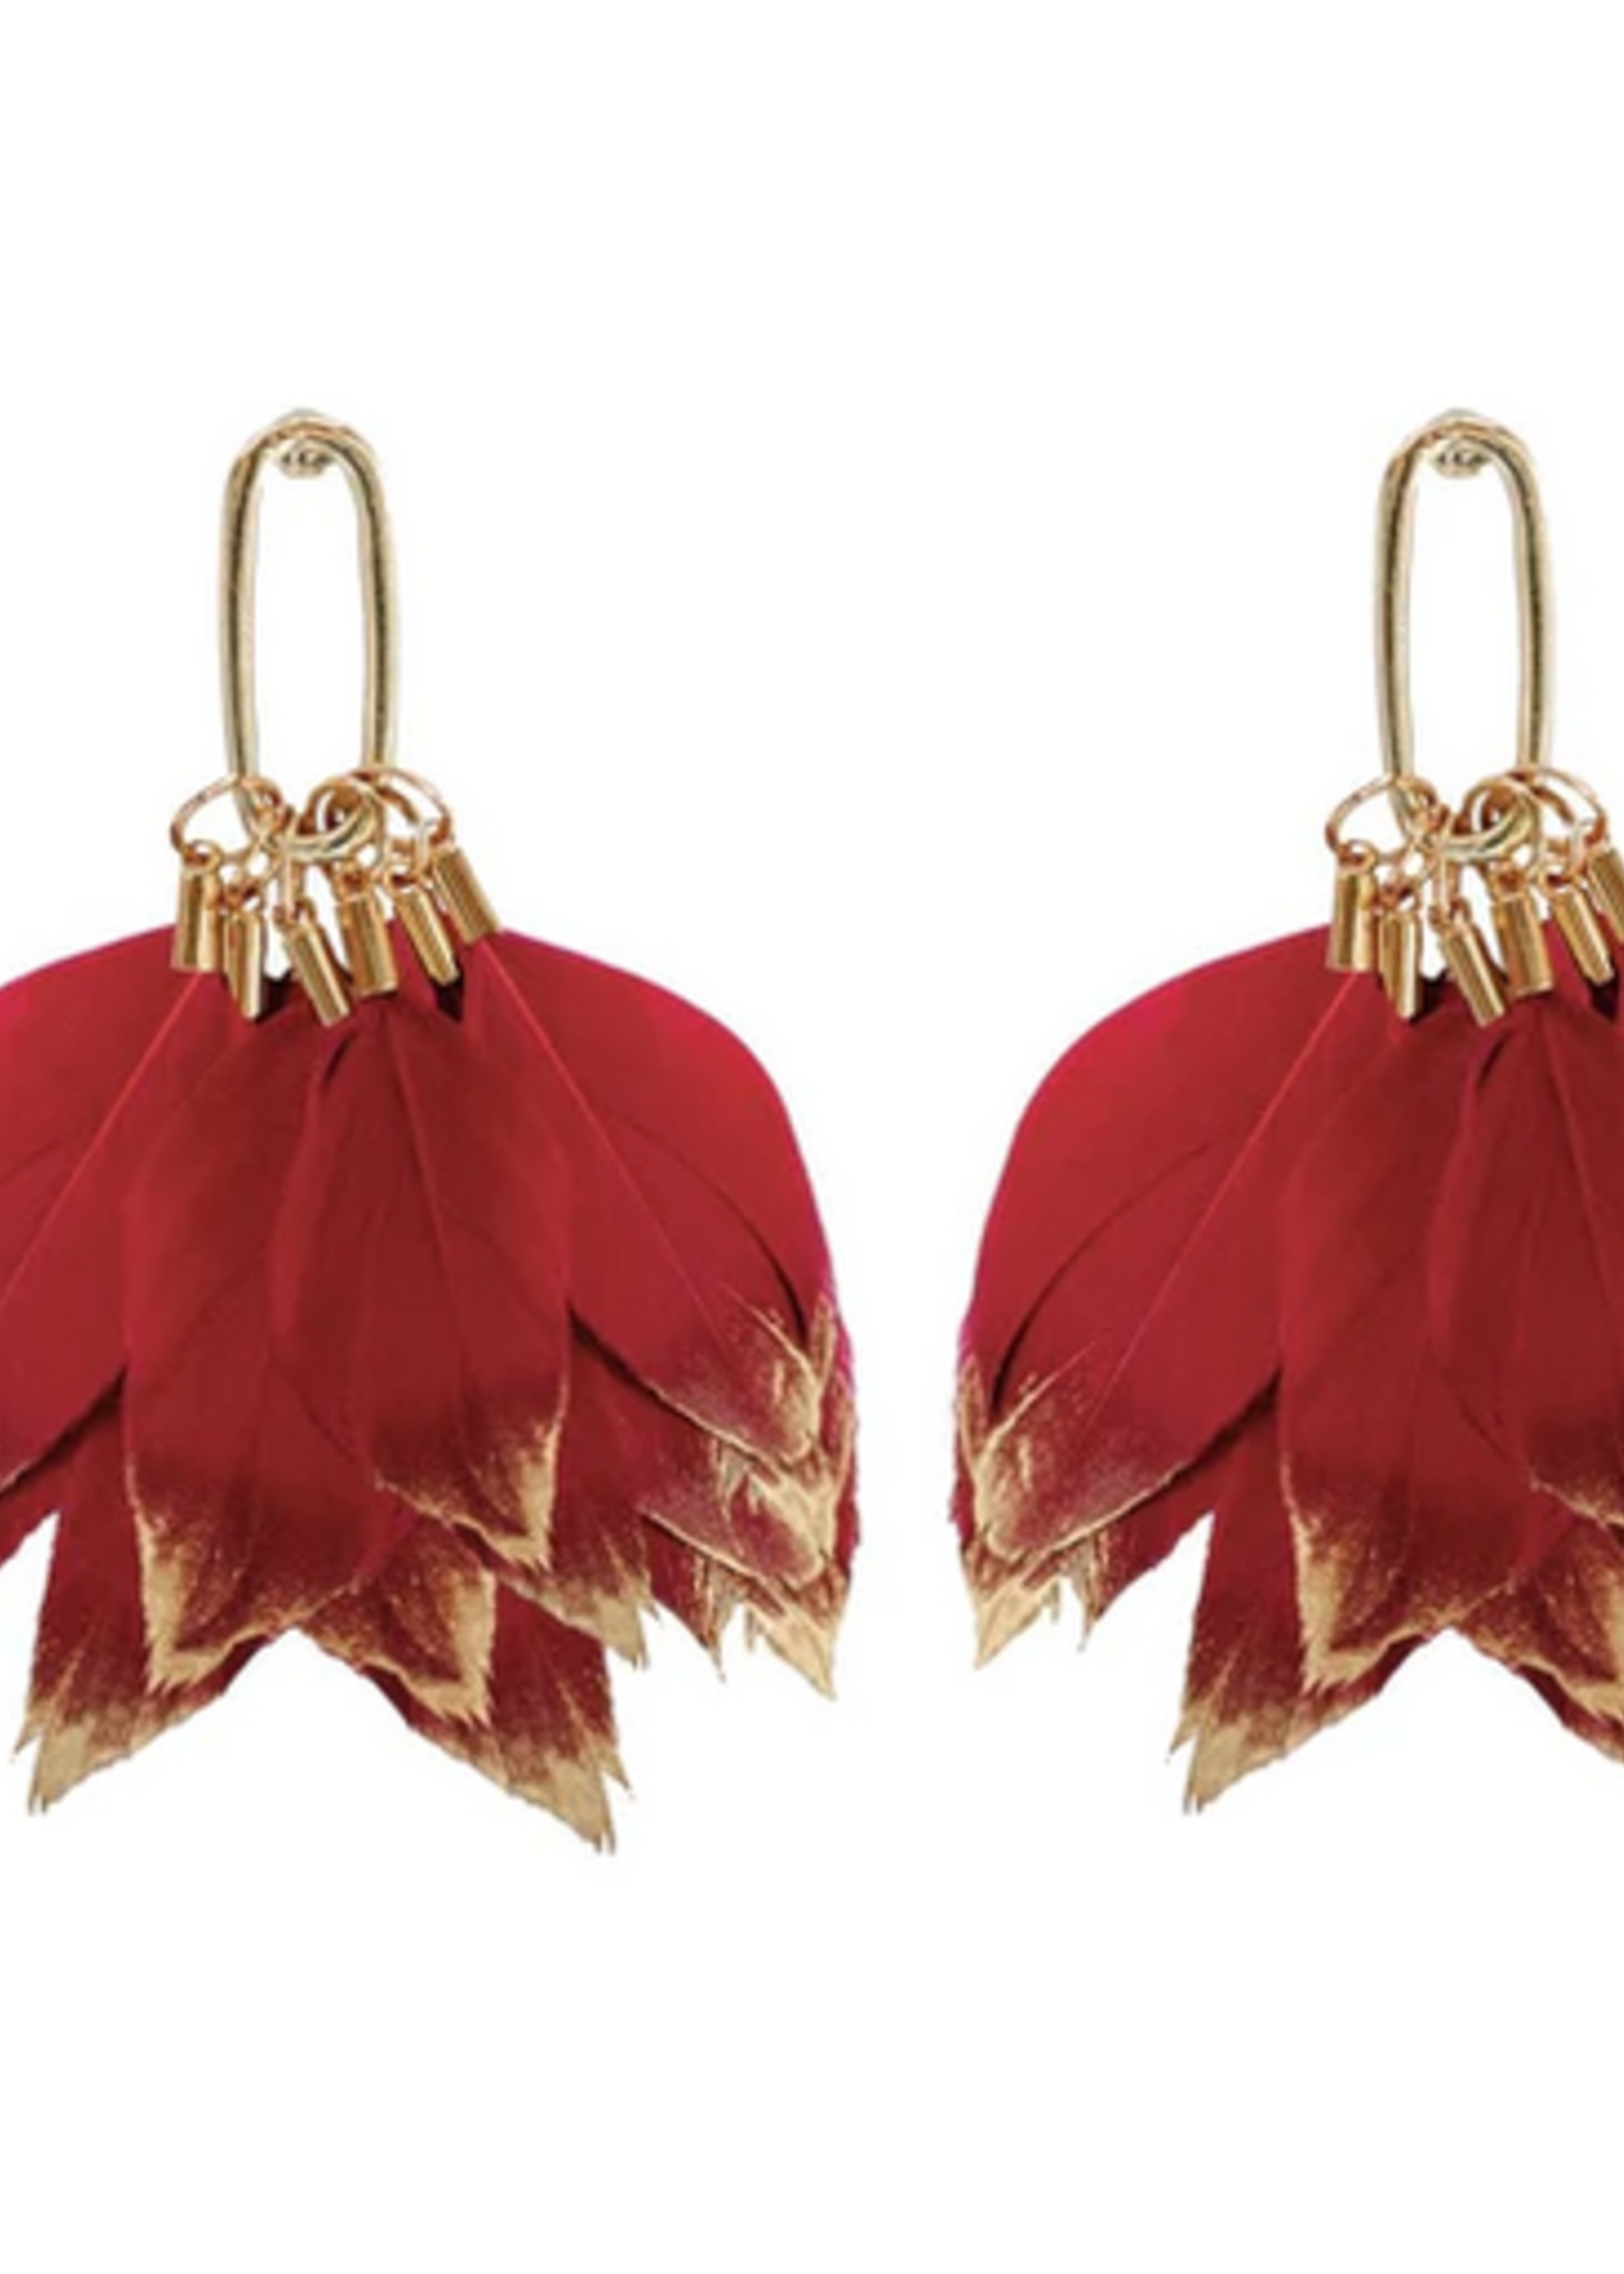 ST. ARMANDS OF DESIGNS OF SARASOTA GARNET GOLD DIPPED FEATHER STATEMENT EARRINGS